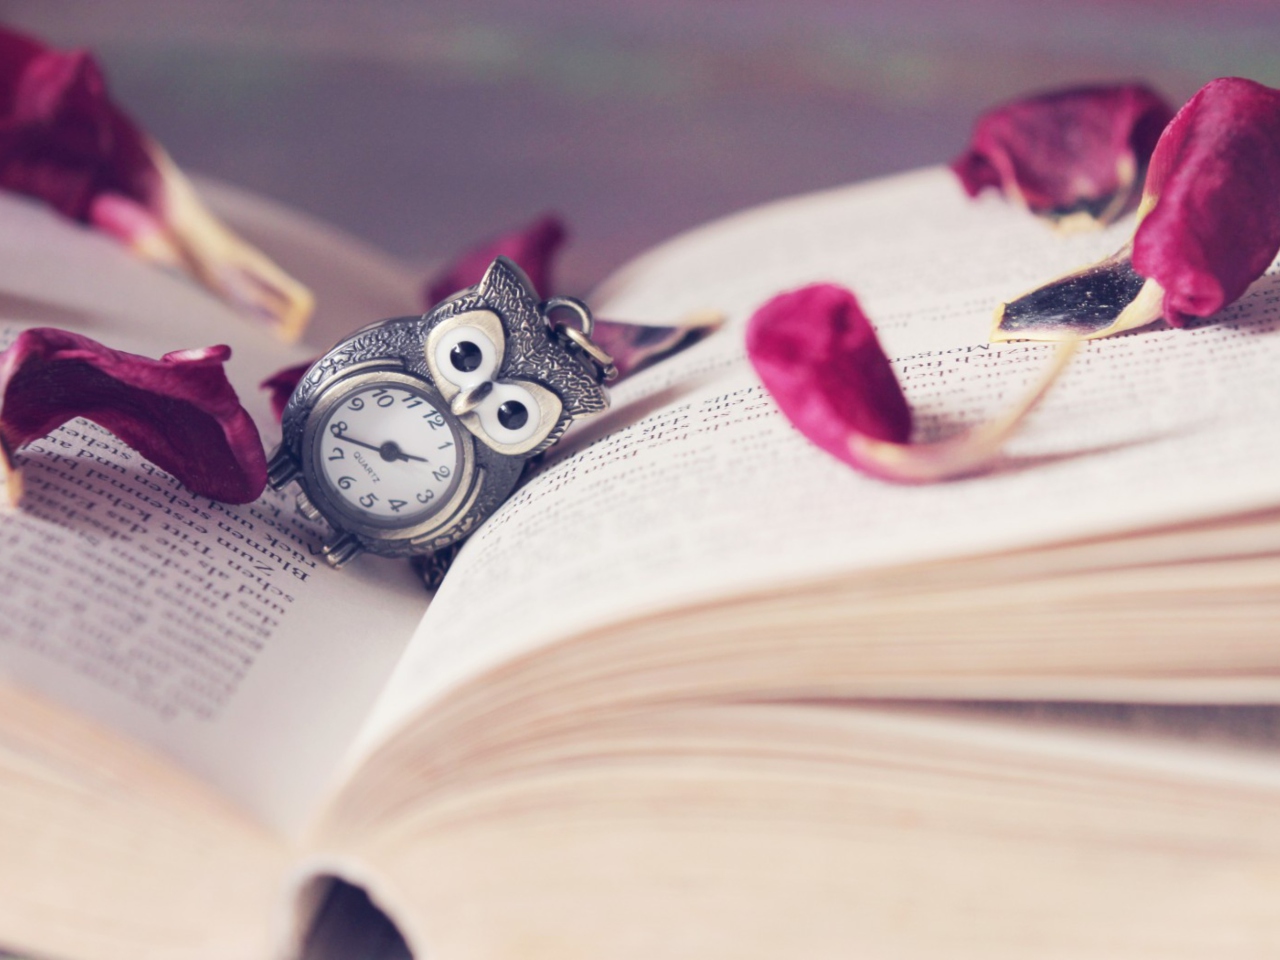 Vintage Owl Watch And Book screenshot #1 1280x960